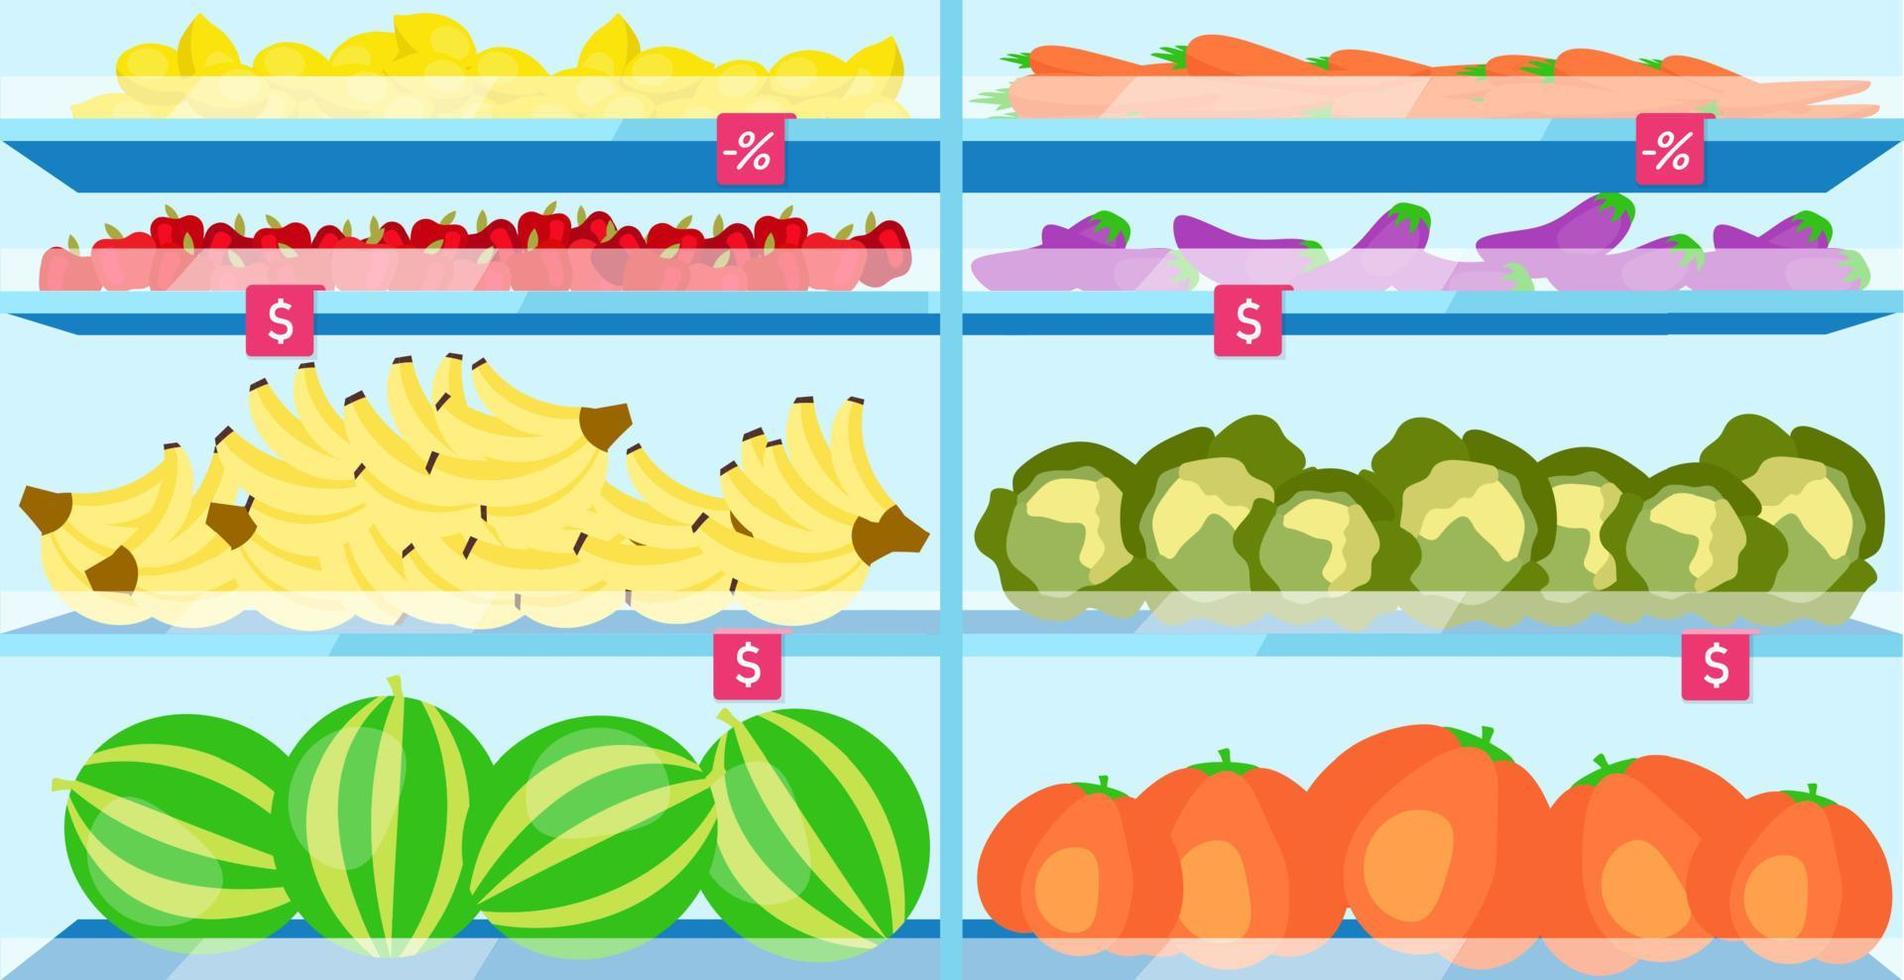 Supermarket shelves with fruits flat vector illustration. Farmers market, shop interior with fruits and vegetables. Healthy dieting, seasonal food. Vegetarian food in grocery store